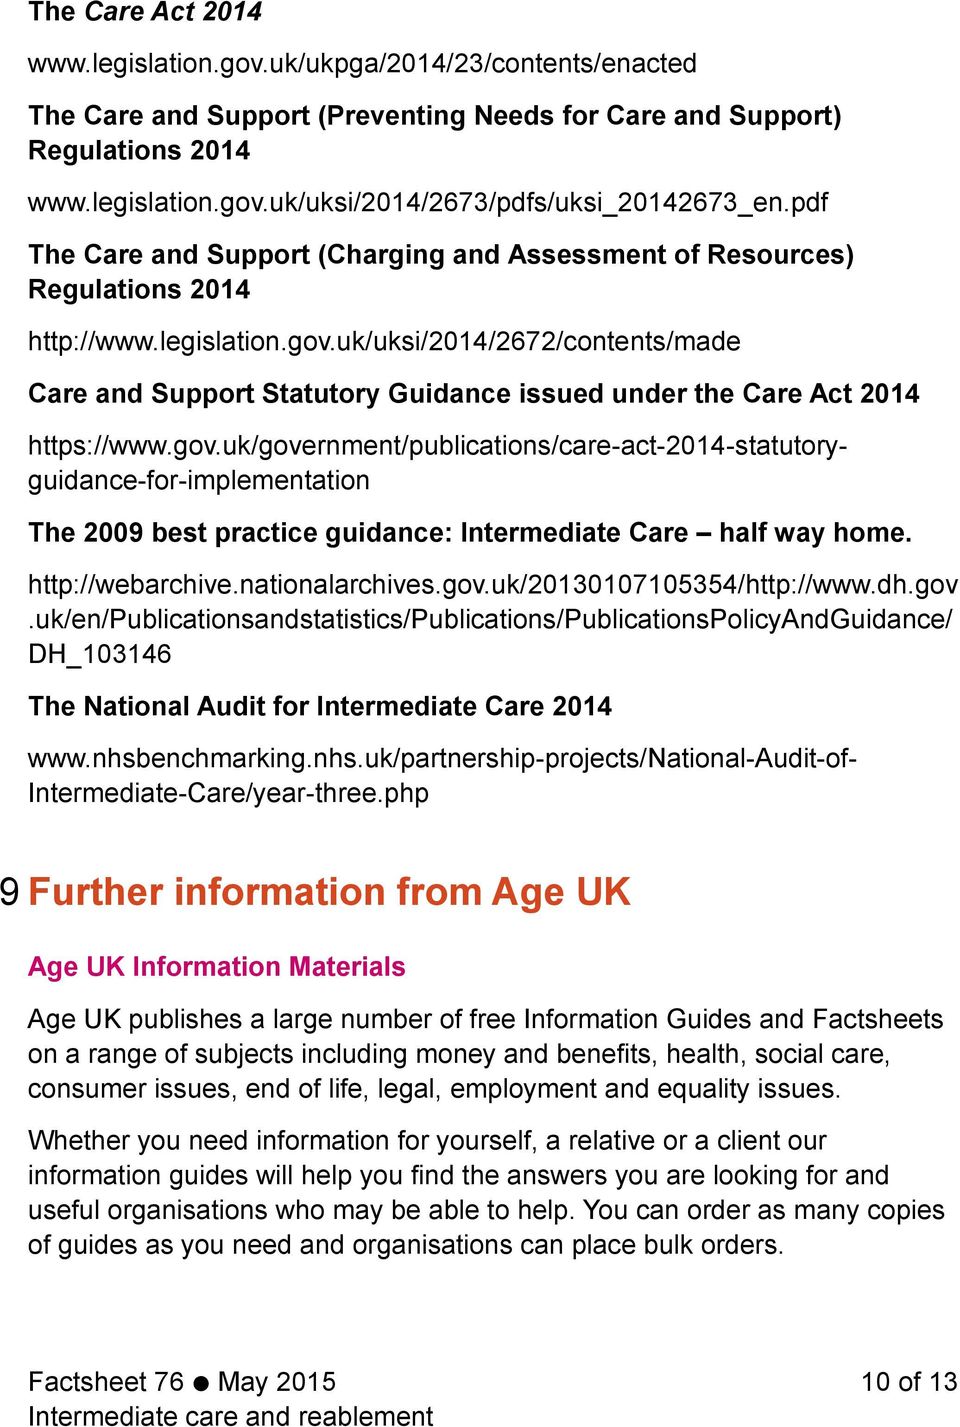 uk/uksi/2014/2672/contents/made Care and Support Statutory Guidance issued under the Care Act 2014 The 2009 best practice guidance: Intermediate Care half way home. http://webarchive.nationalarchives.